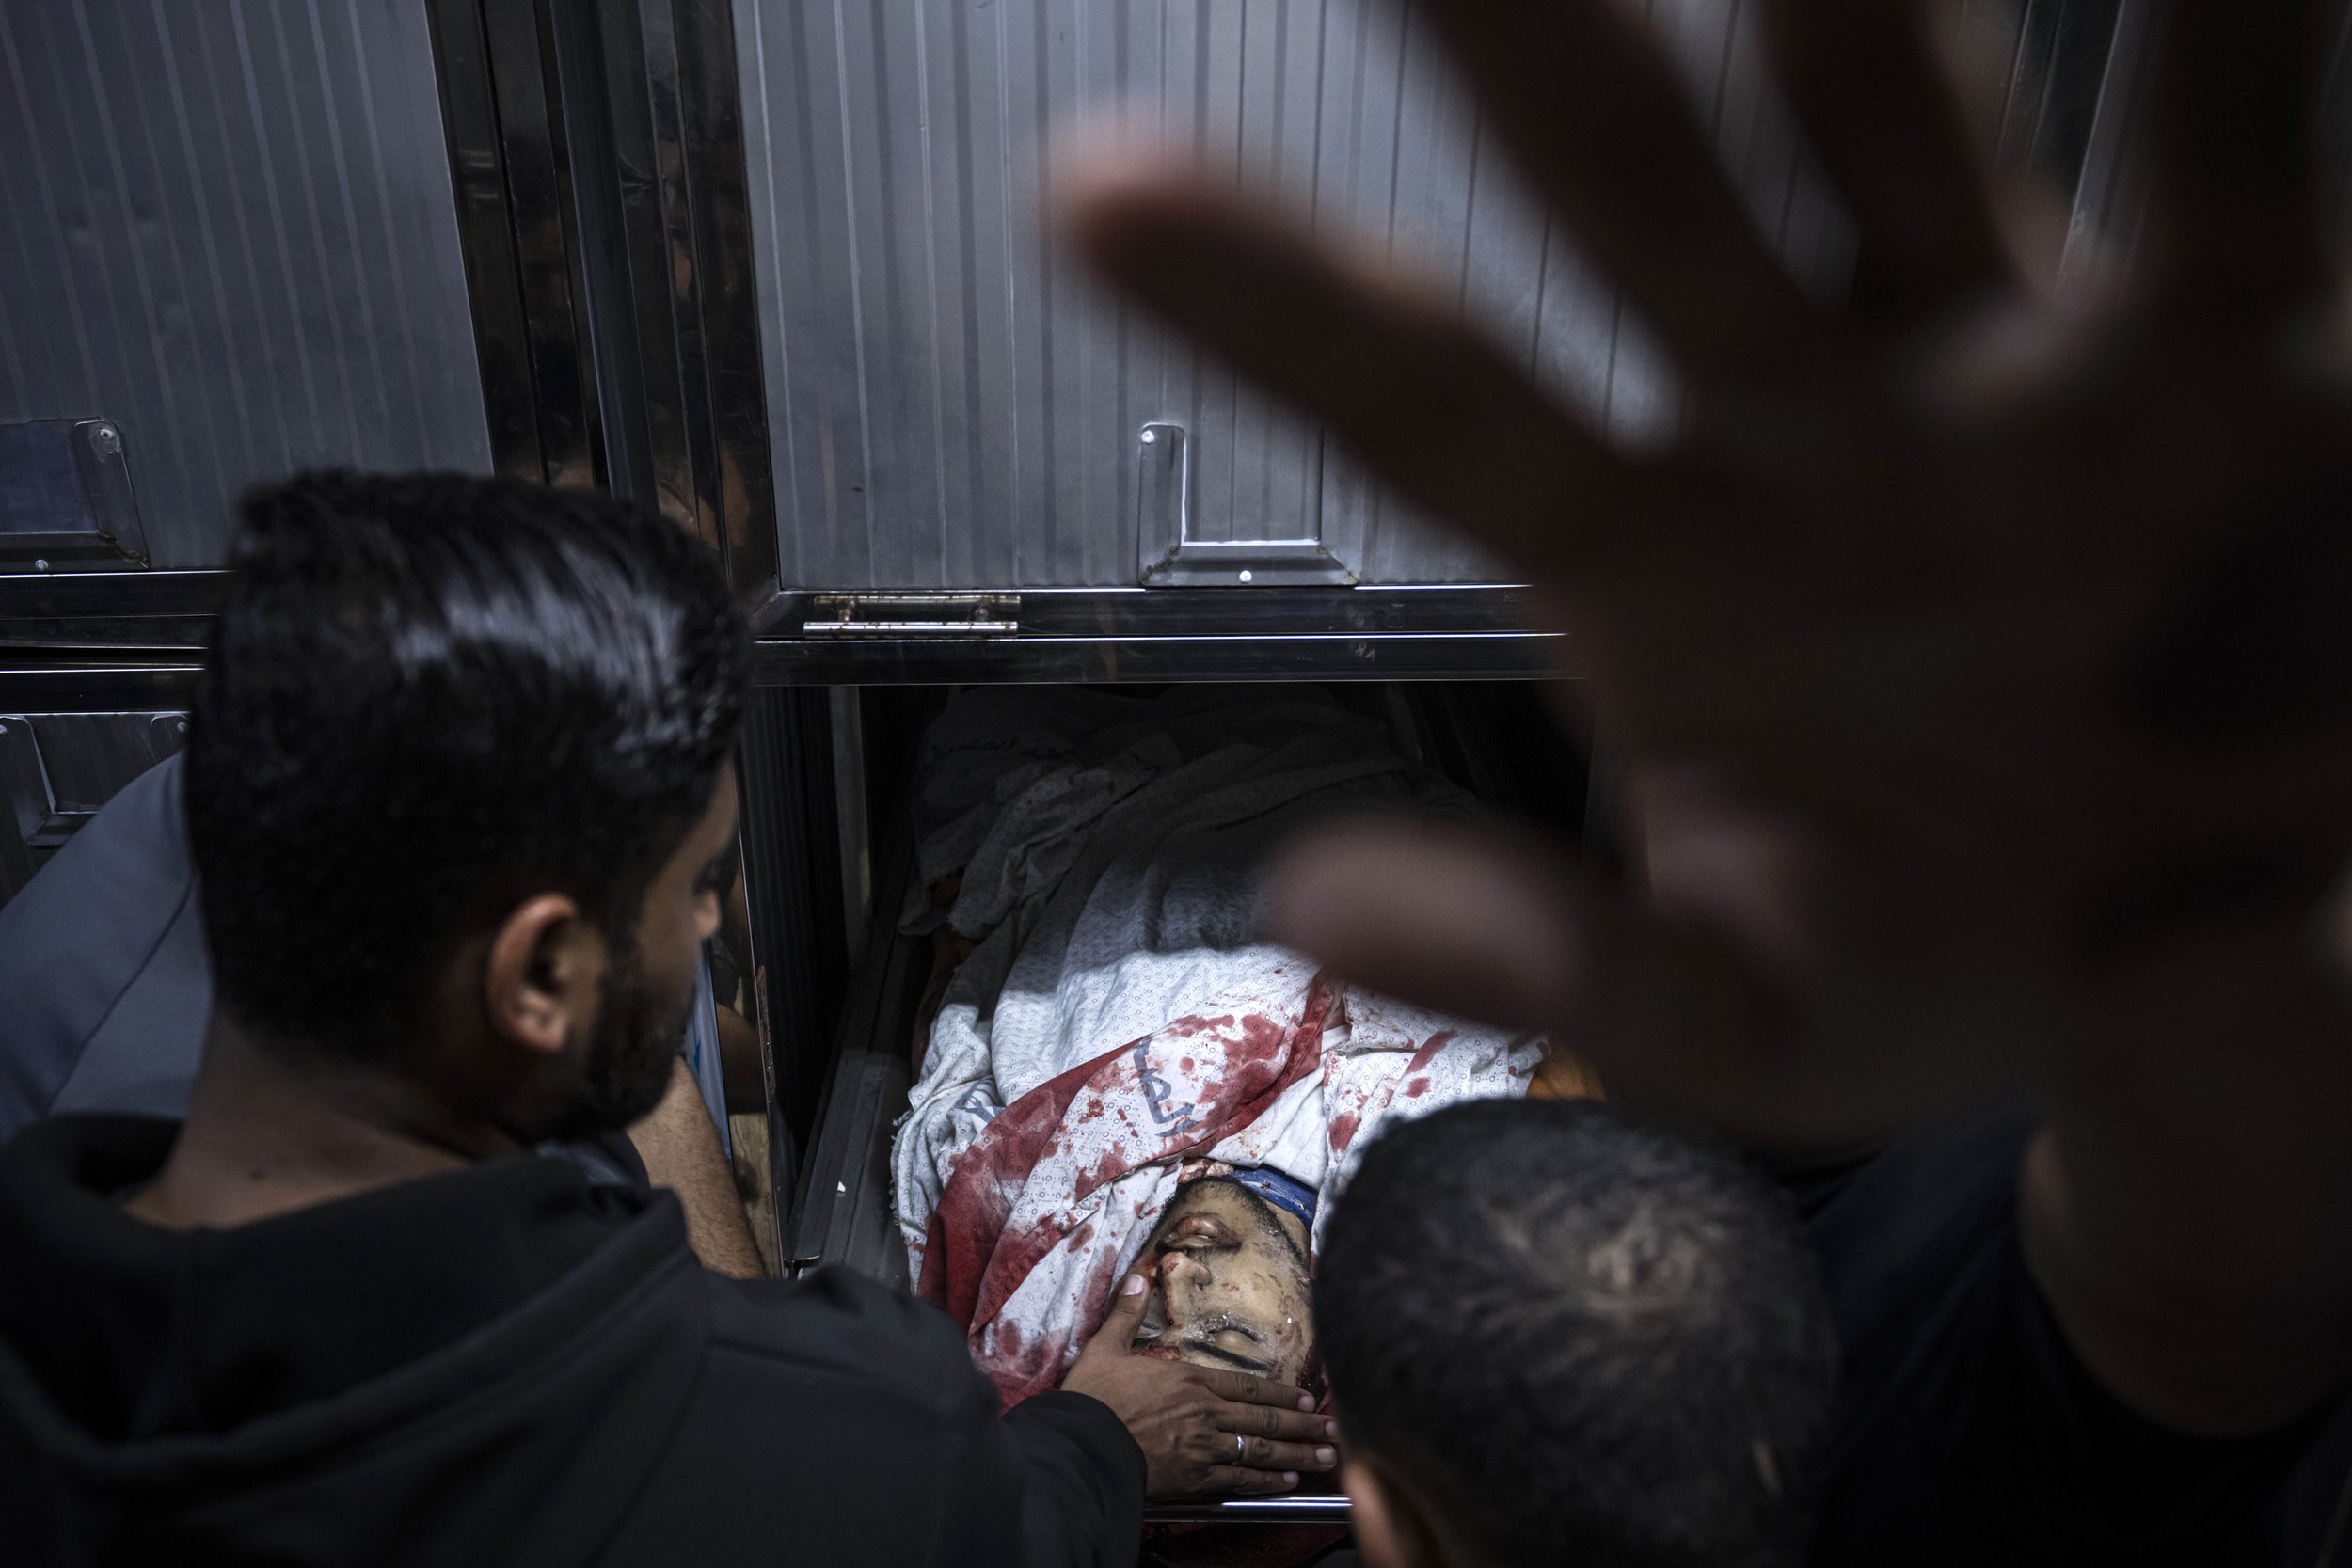  A mourner touches the body of a Palestinian man killed in an Israeli airstrike, in the morgue of Al-Shifa Hospital in Gaza City on May 9, 2023. The Israeli military said it killed three senior commanders of the militant Islamic Jihad group in target